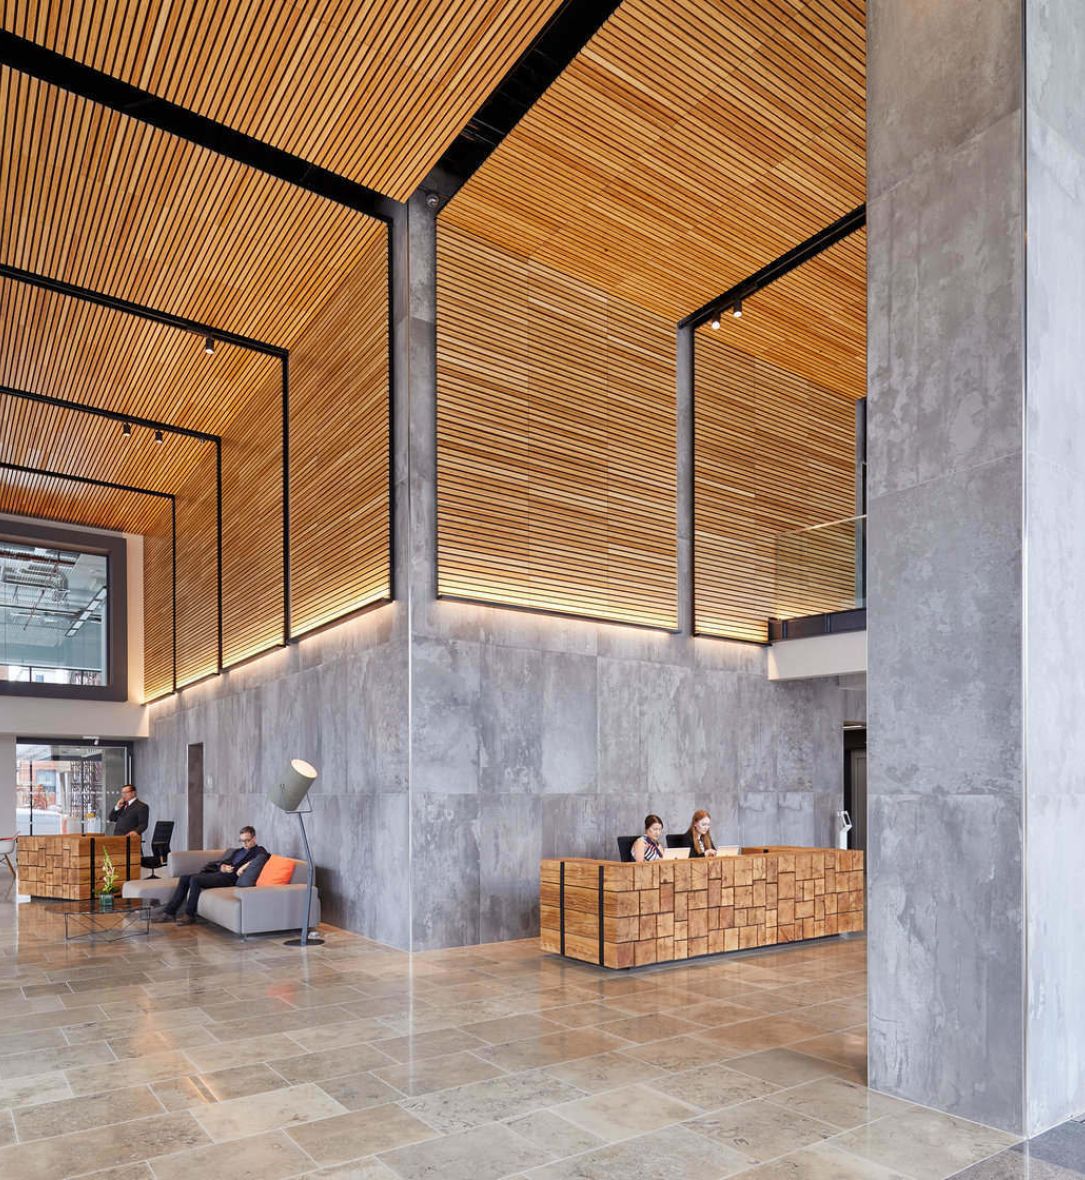 wood ceilings and wooden slatted walls by BCL at Thames Tower